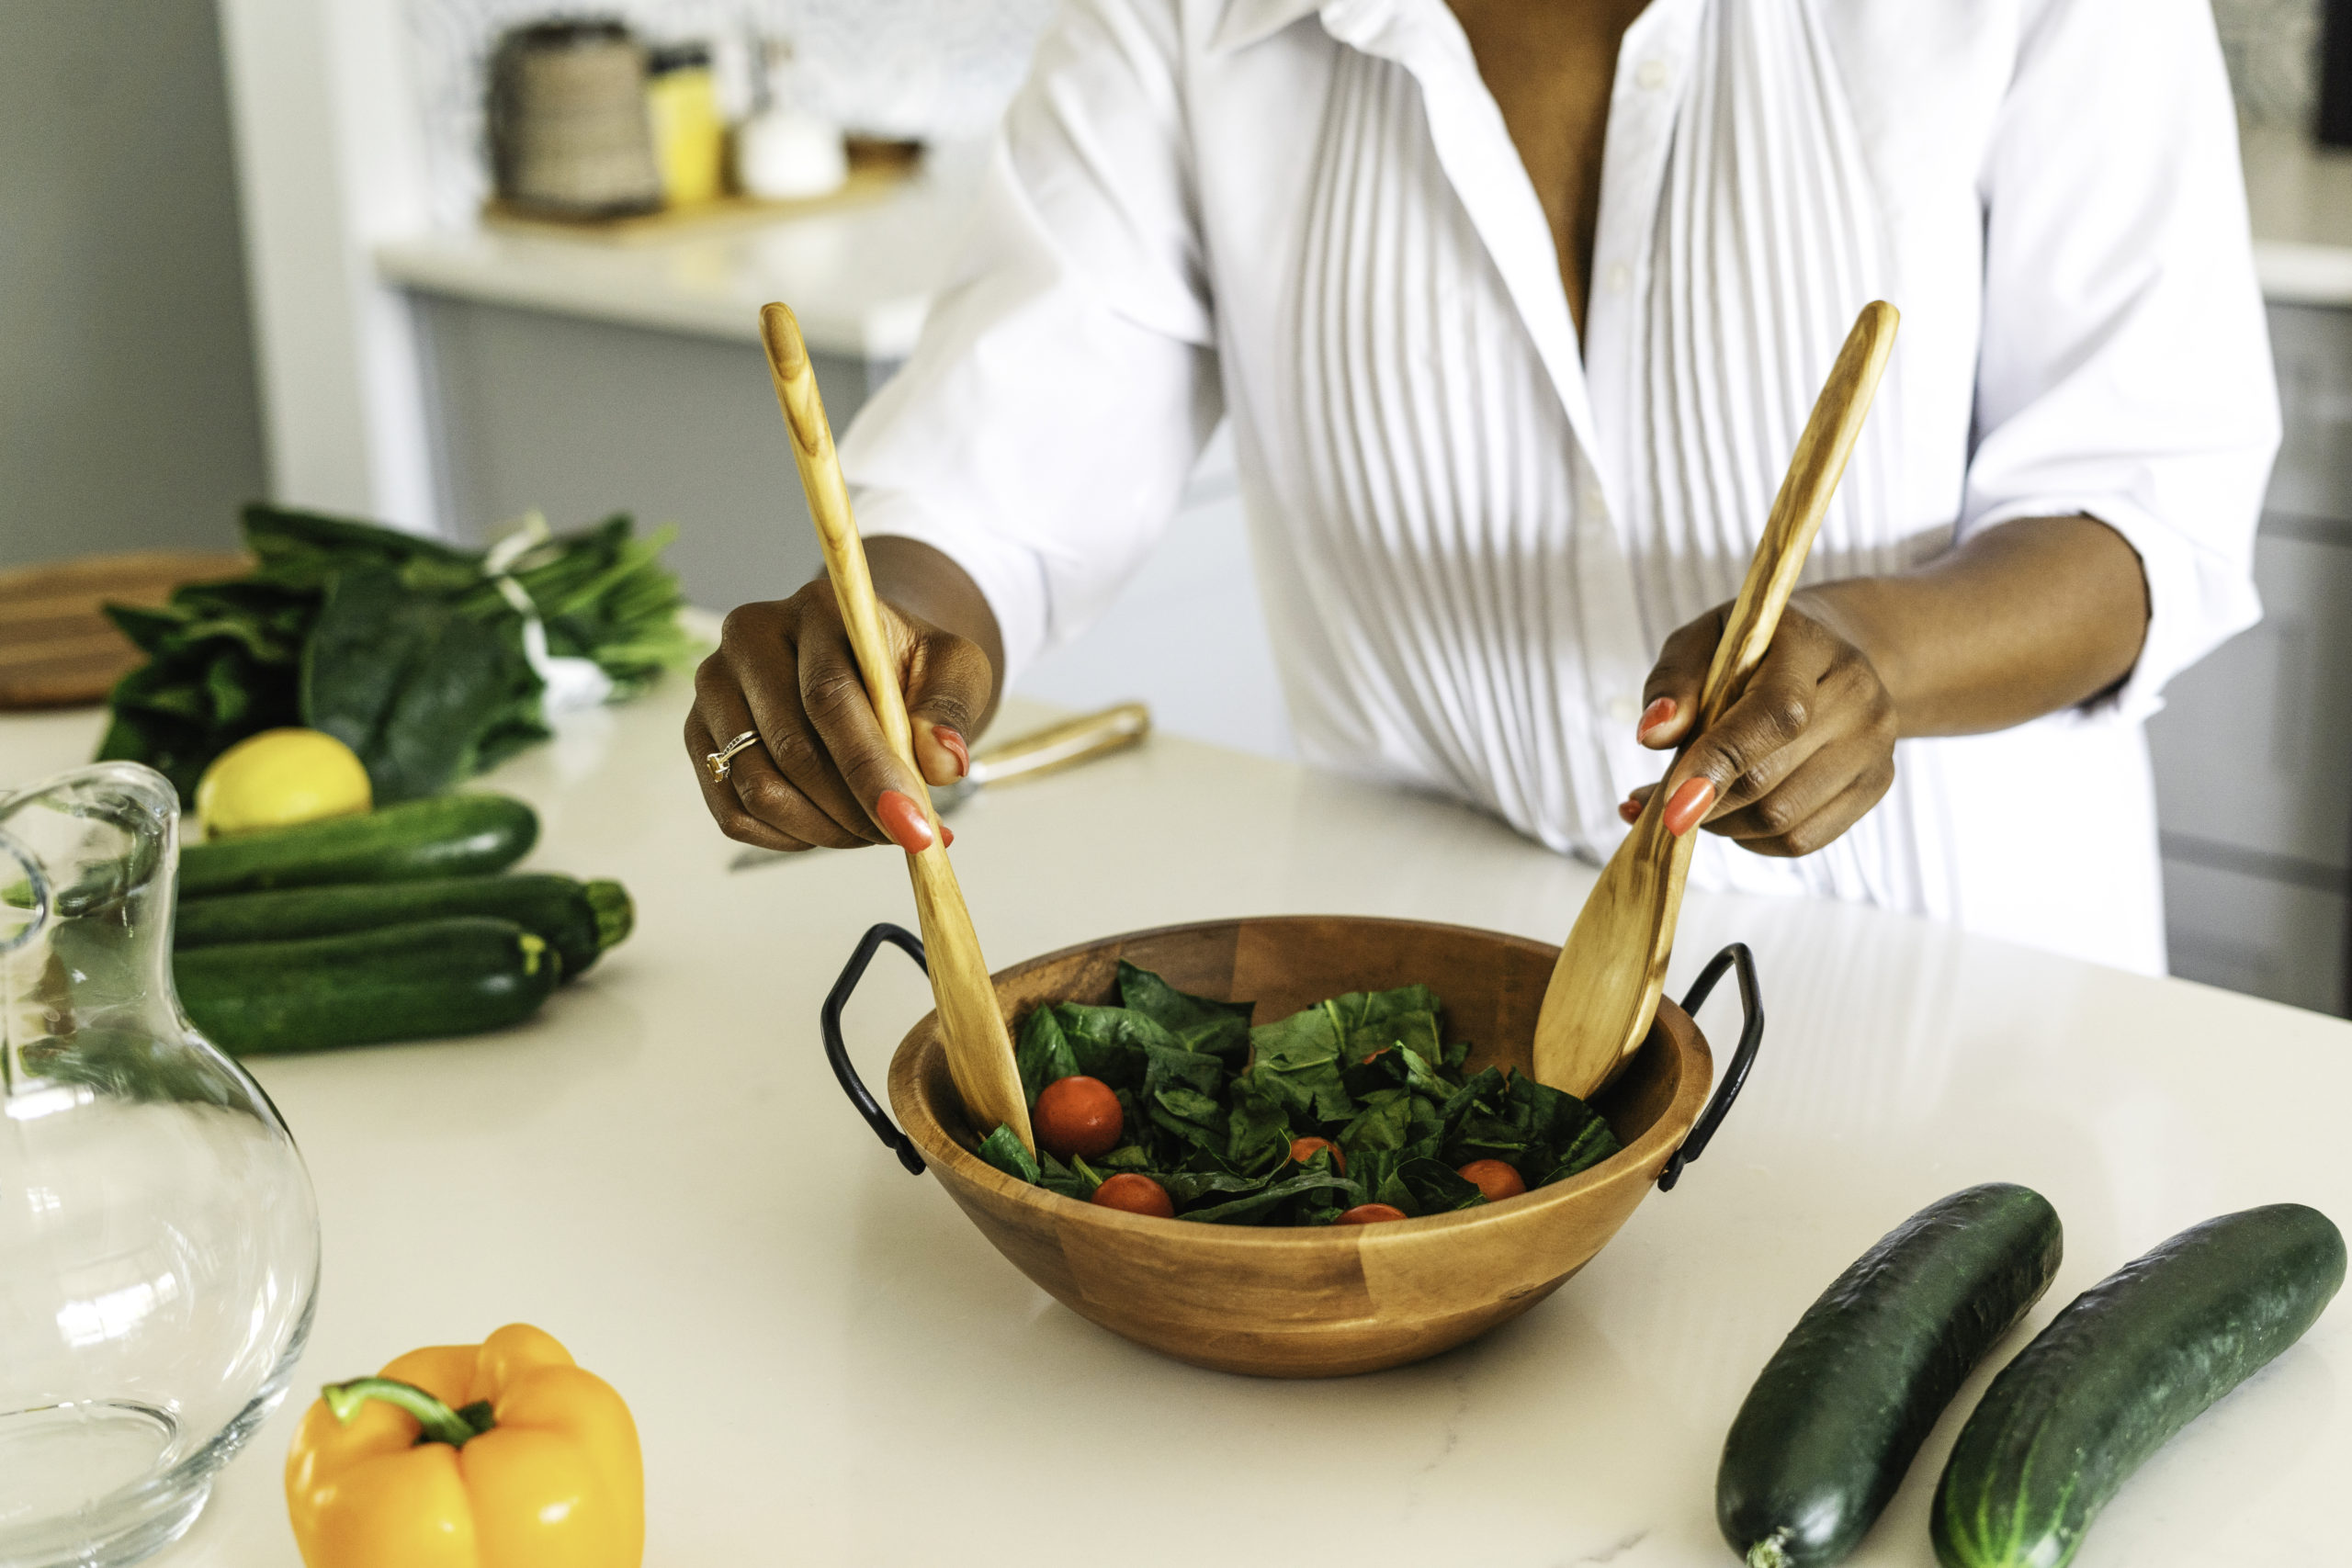 black-lady-wearing-a-white-shirt-and-mixing-greenish-food-in-a-wooden-bowl-on-a-cream-colour-table-top